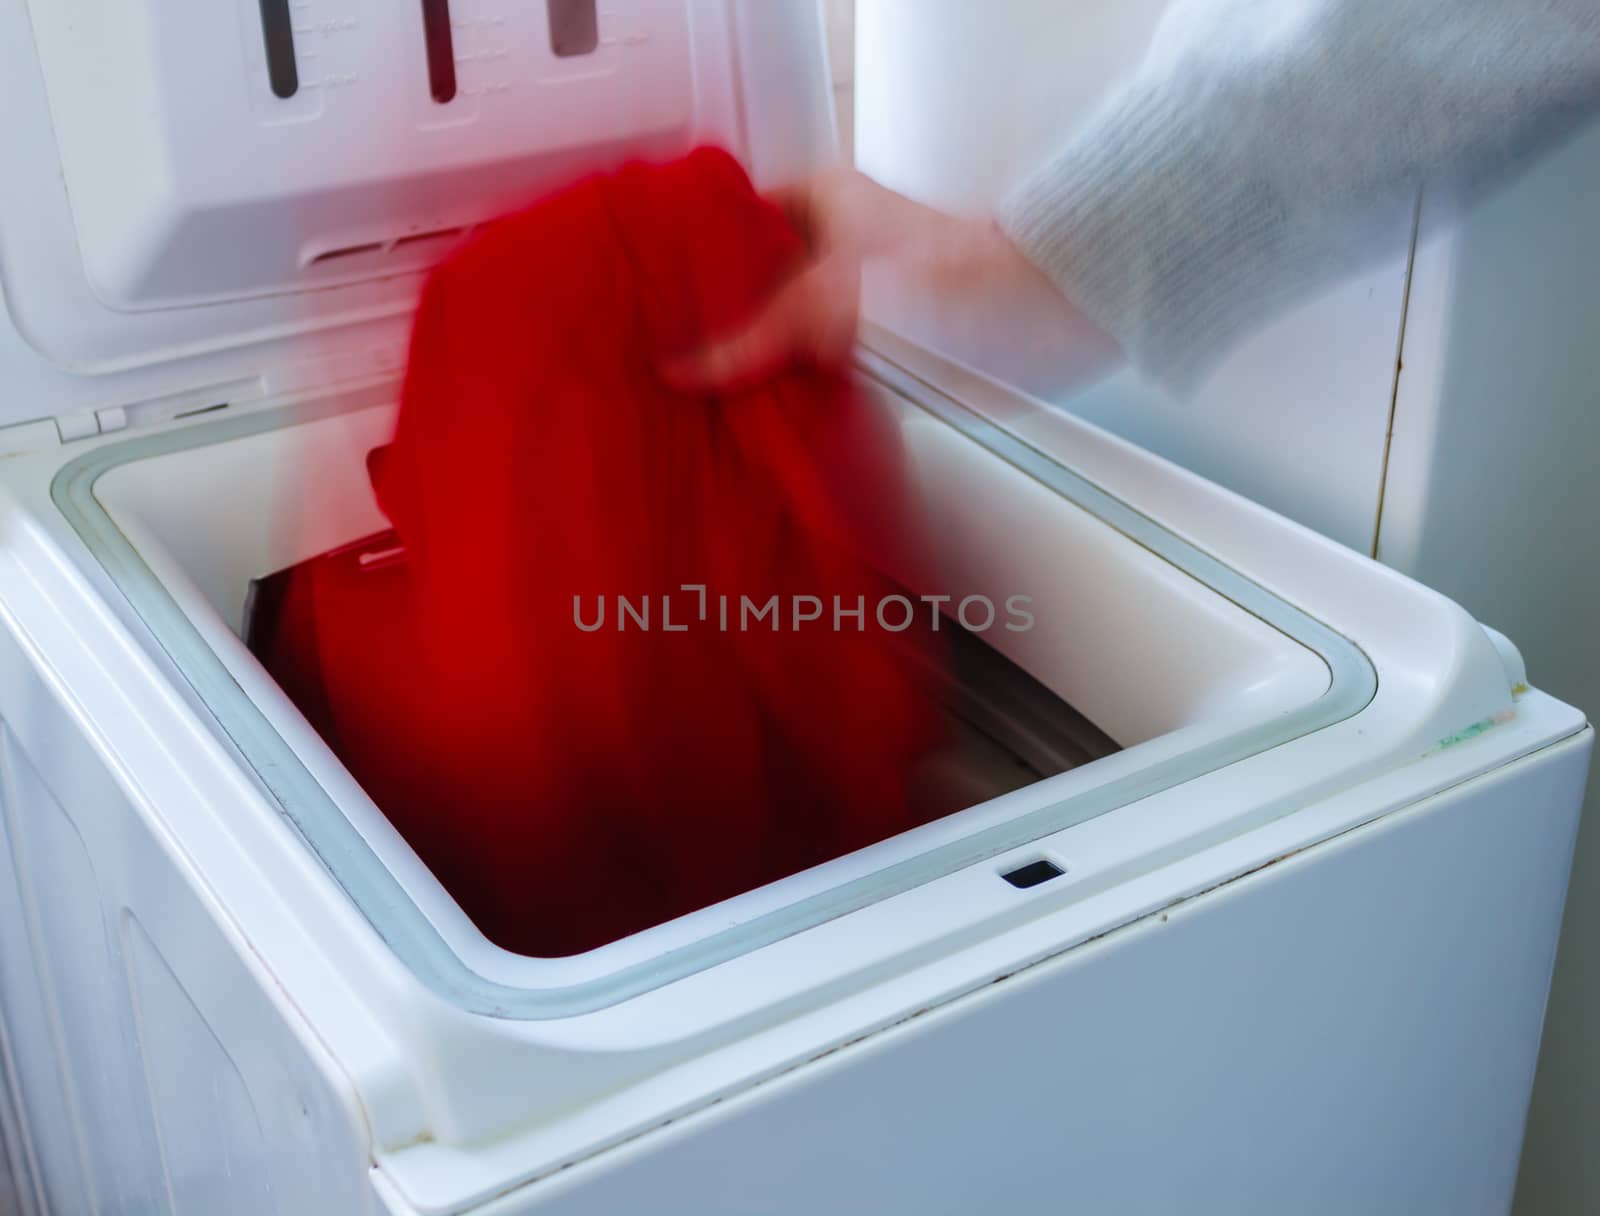 fall fast of a cloth in a washing machine by moorea